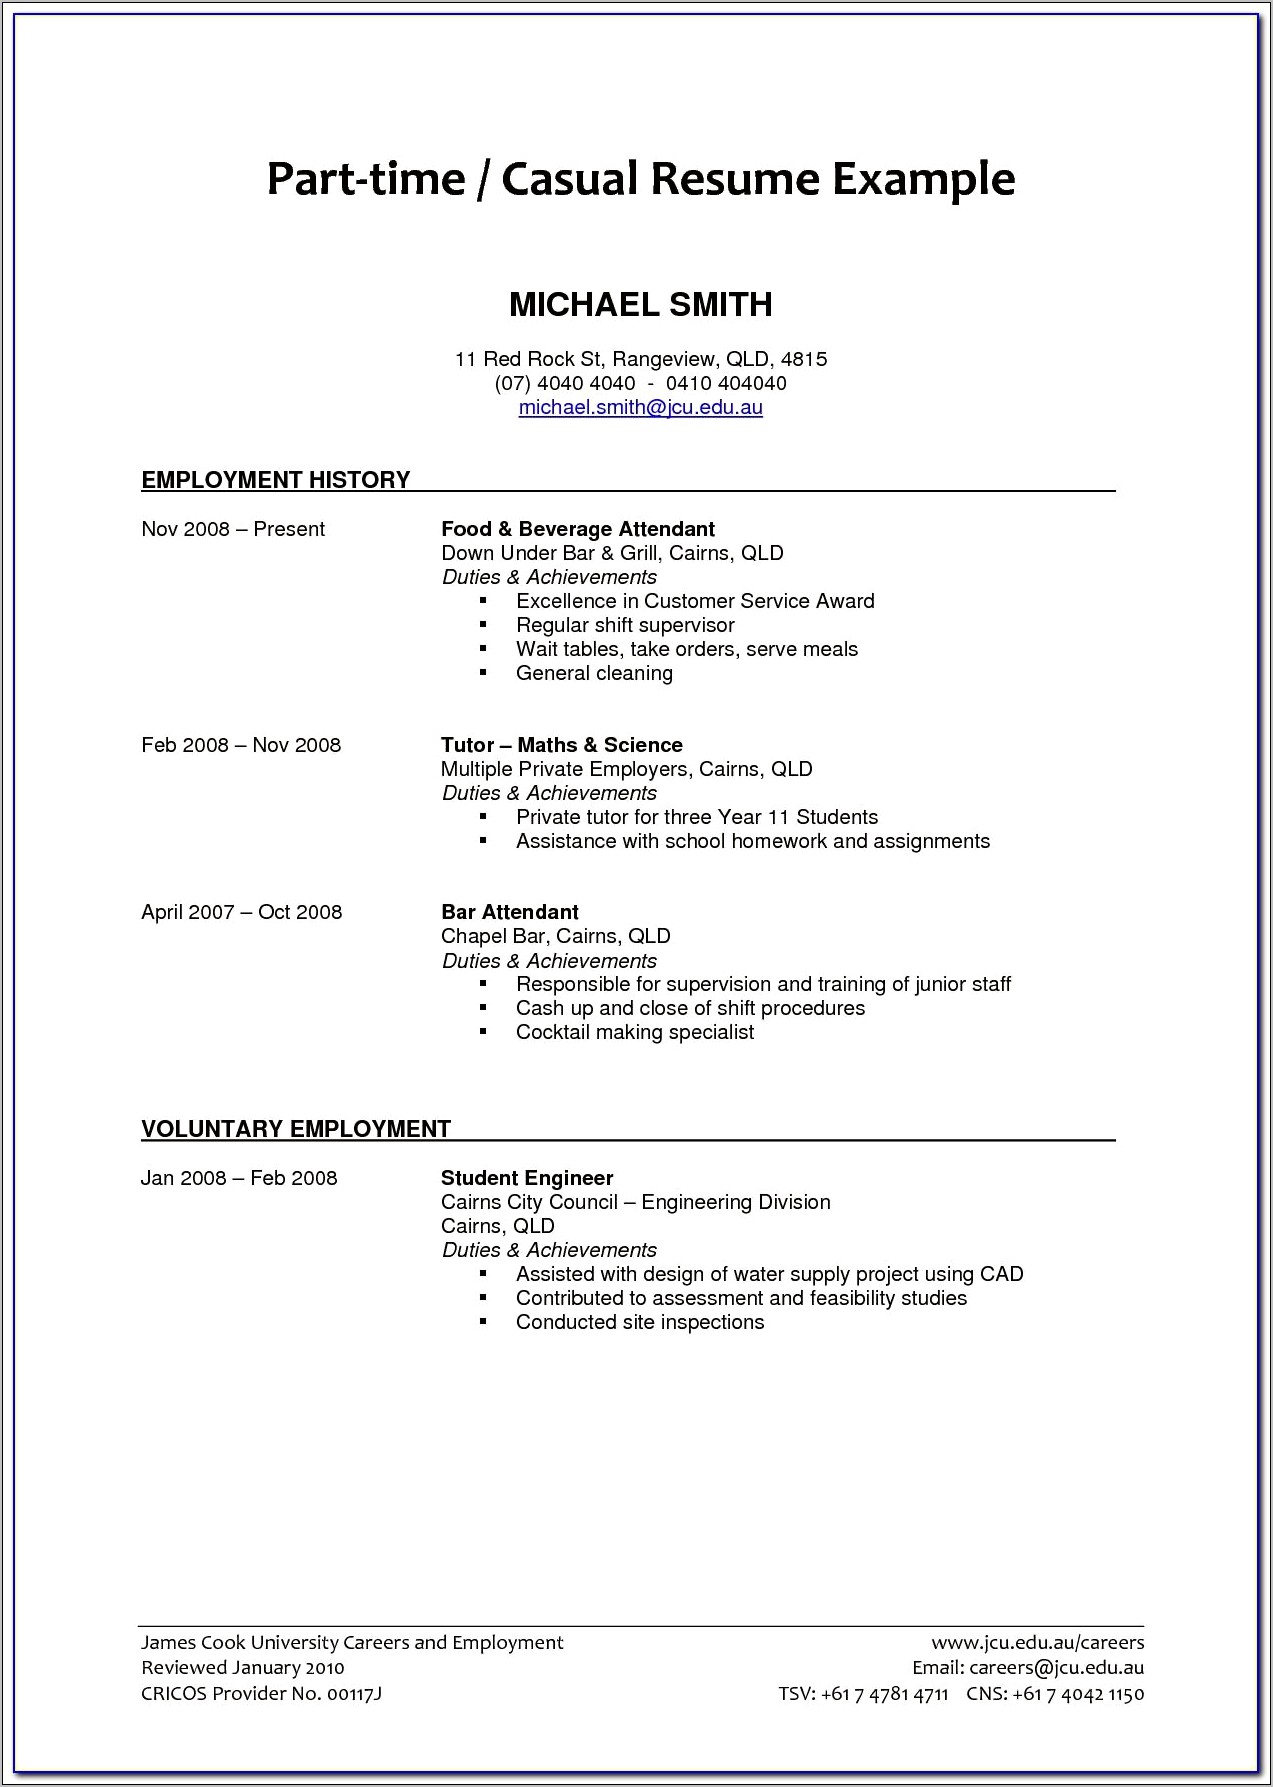 Resume Objective Samples For Experienced Part Time